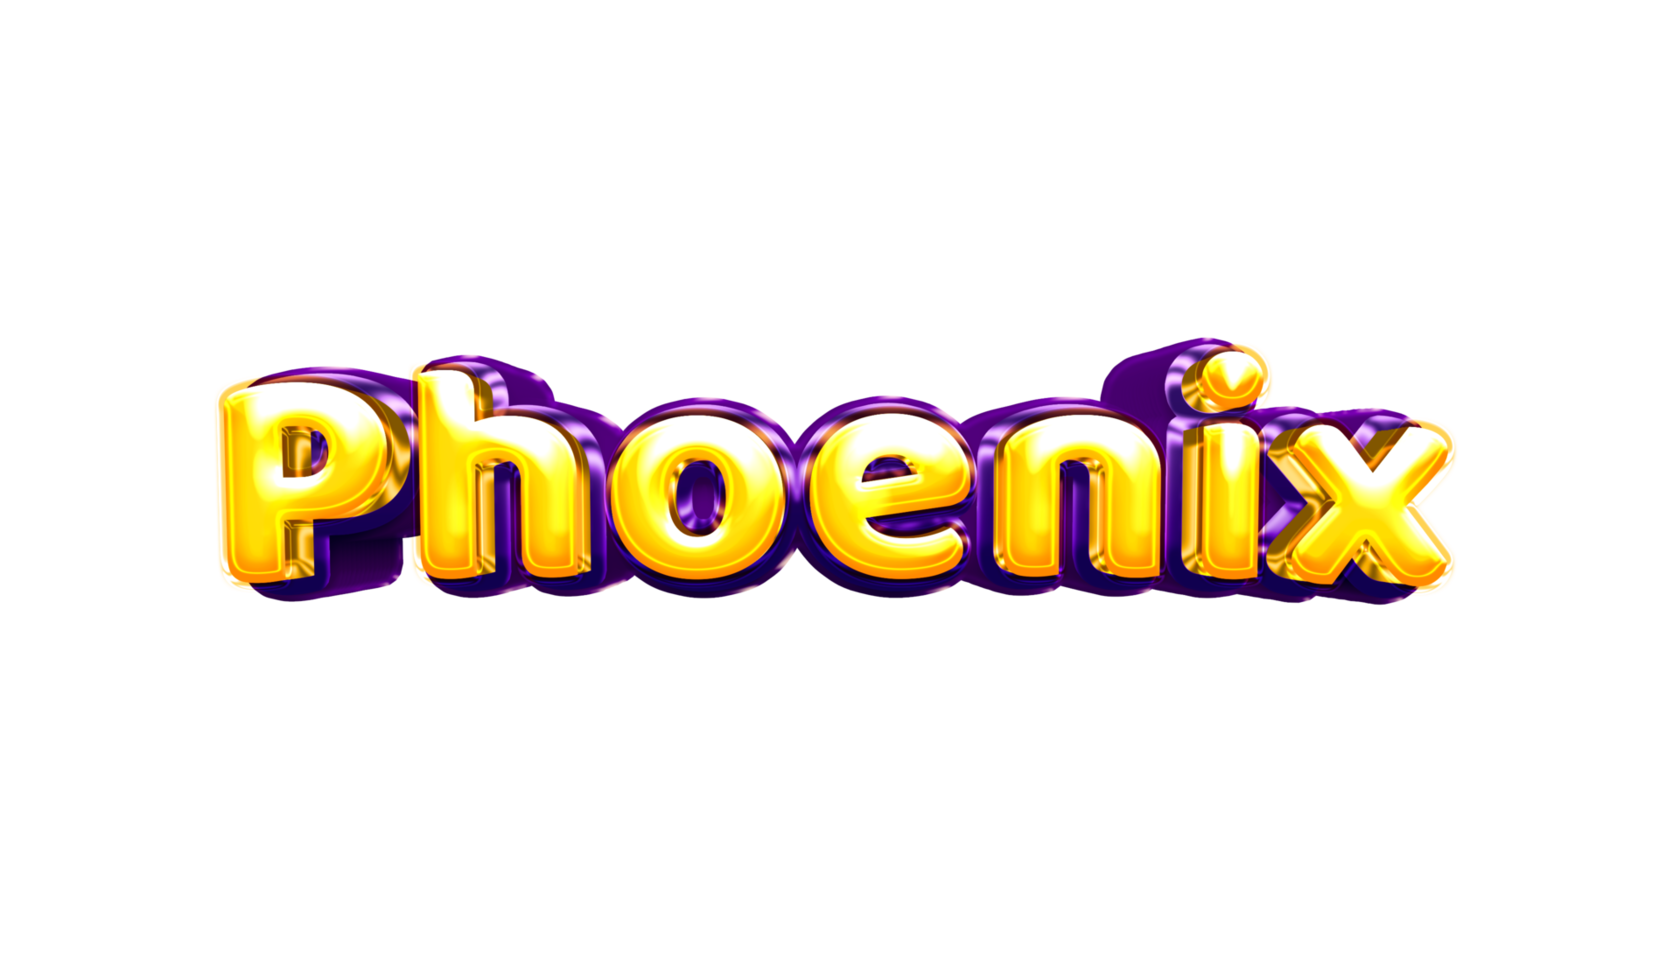 girls name sticker colorful party balloon birthday helium air shiny yellow purple cutout phoenix png